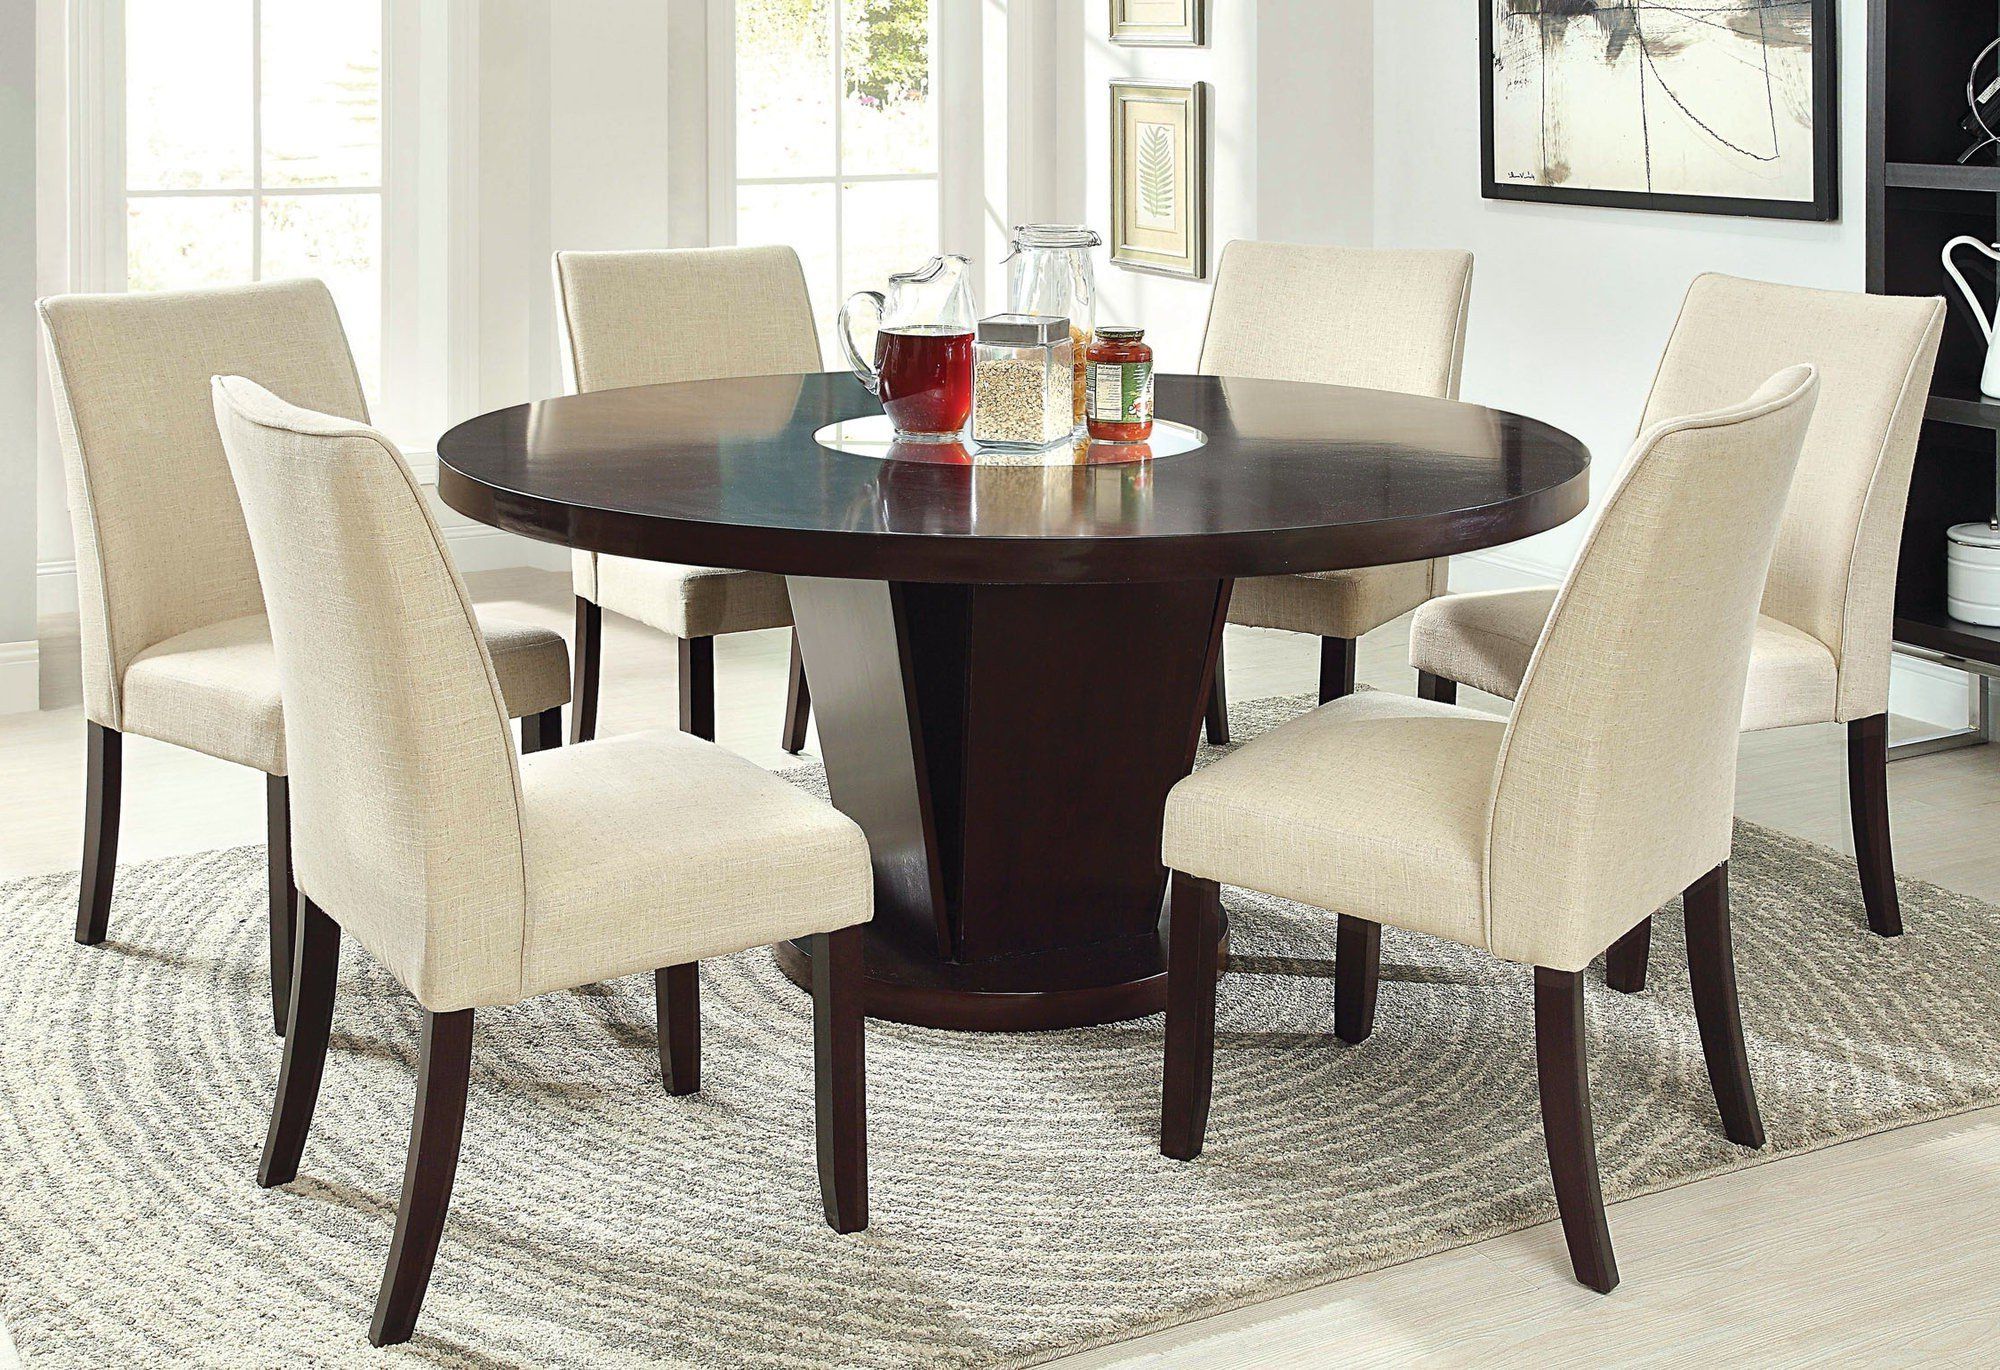 Top 30 of Solid Wood Circular Dining Tables White